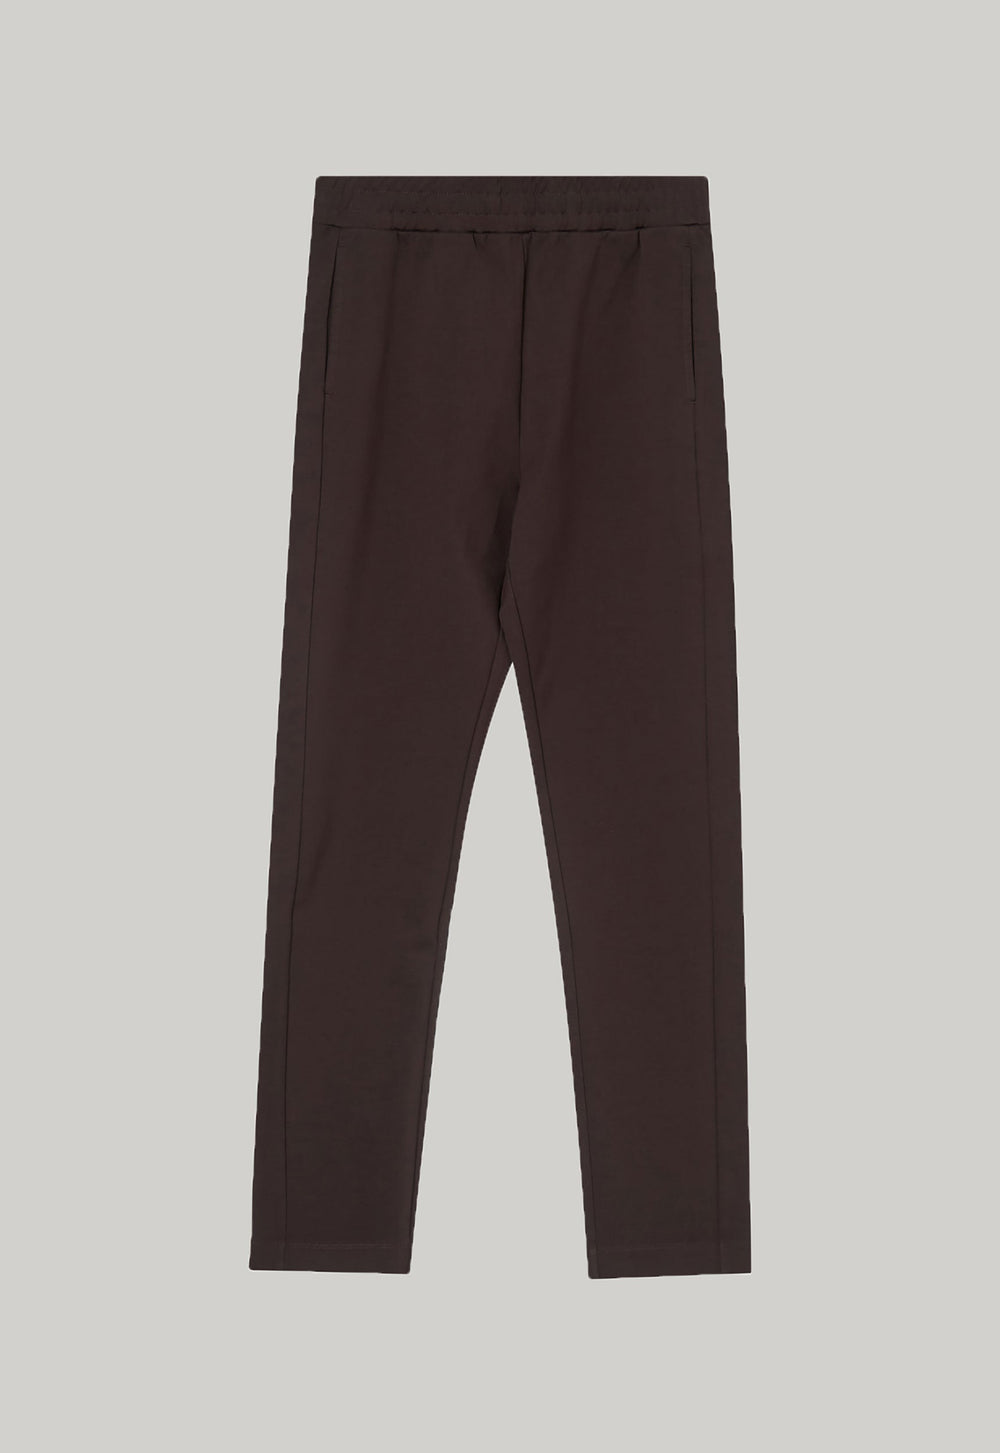 Jac+Jack CUB COTTON PANT in Chocolate Pepper